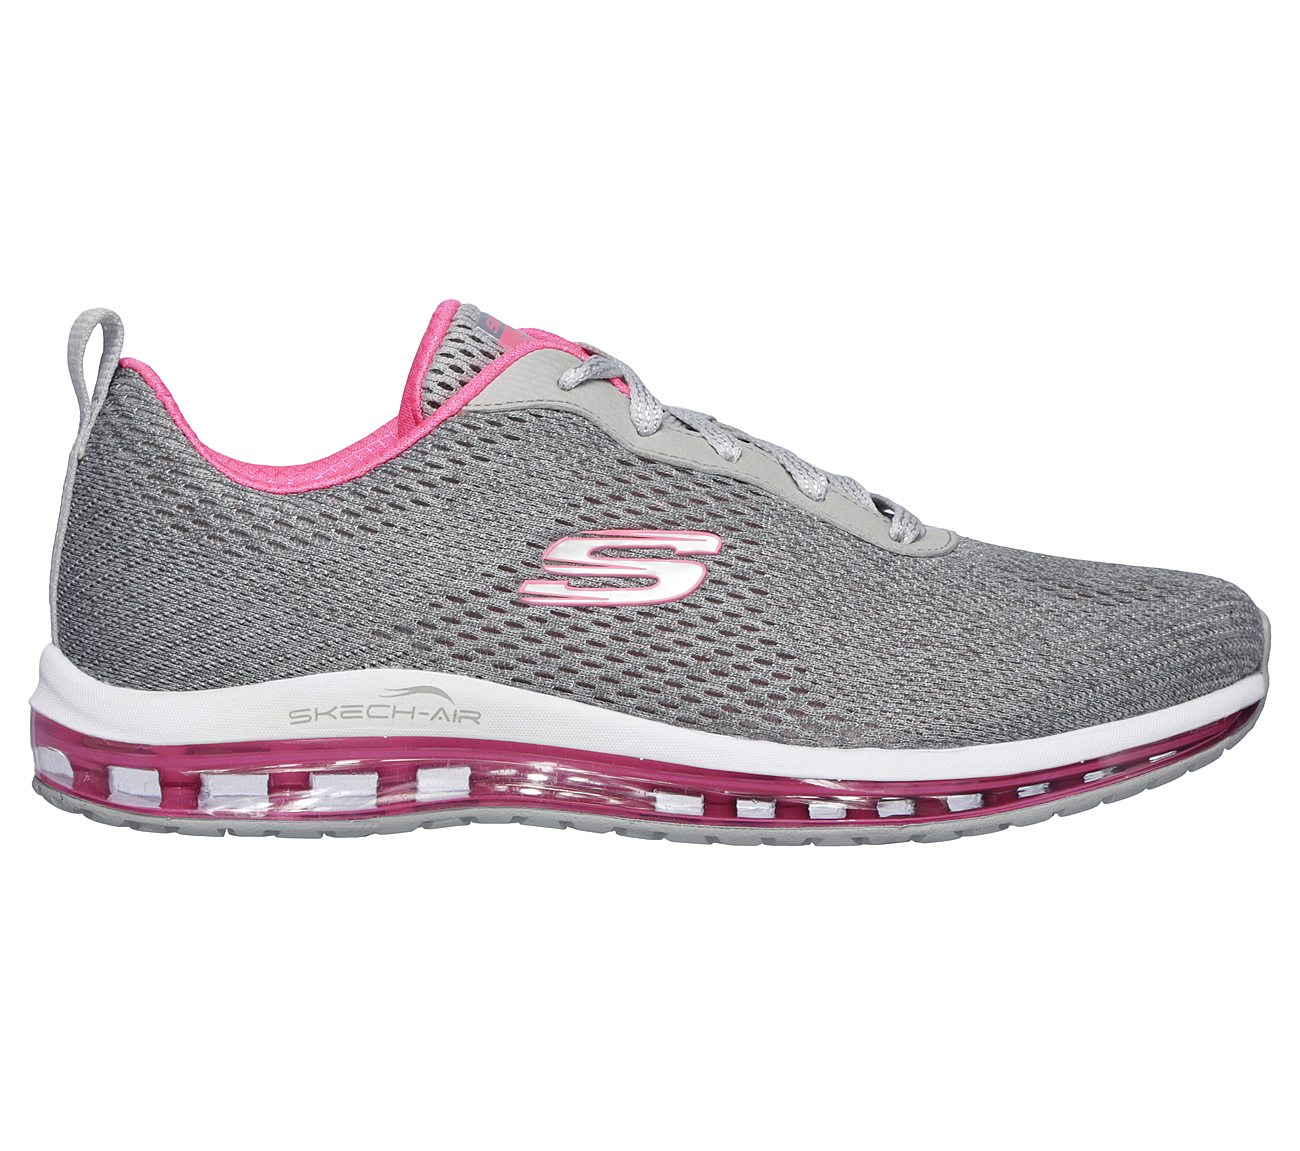 skechers new air shoes